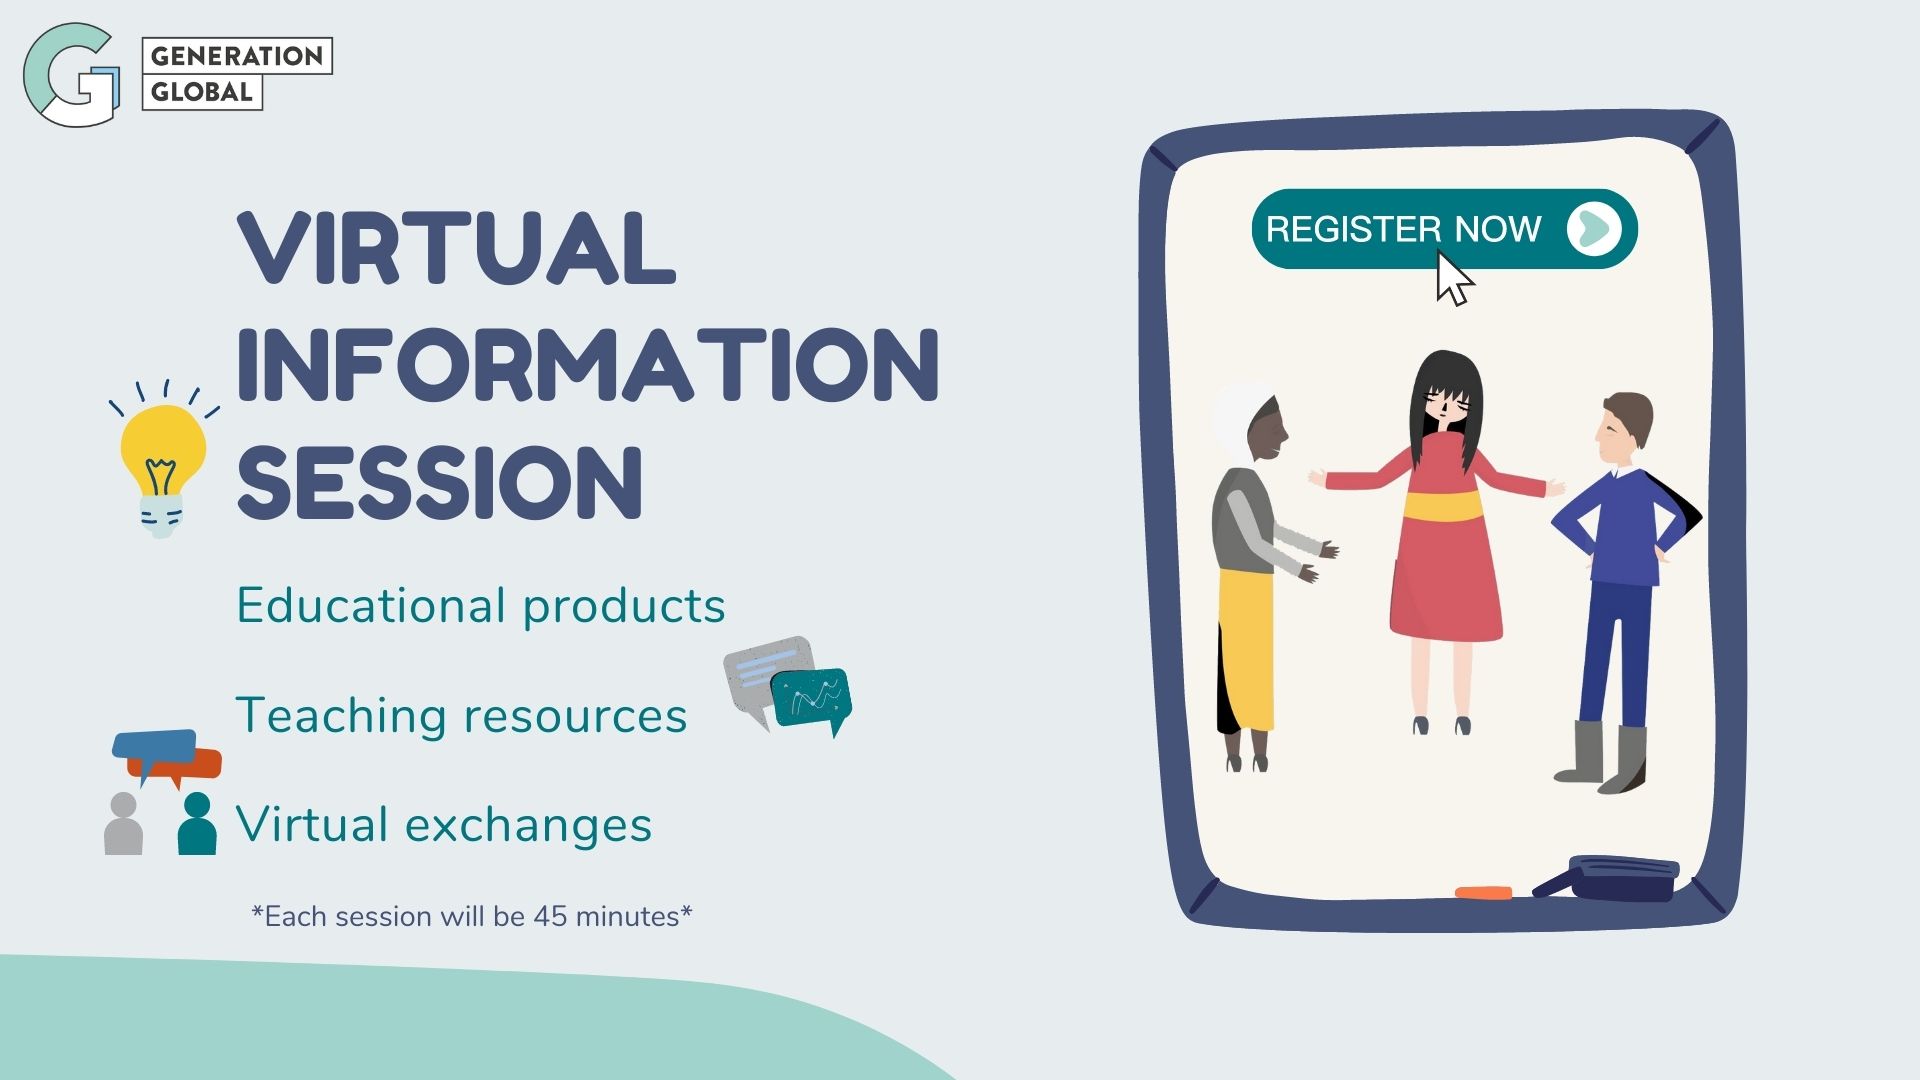 Virtual Information
Sessions